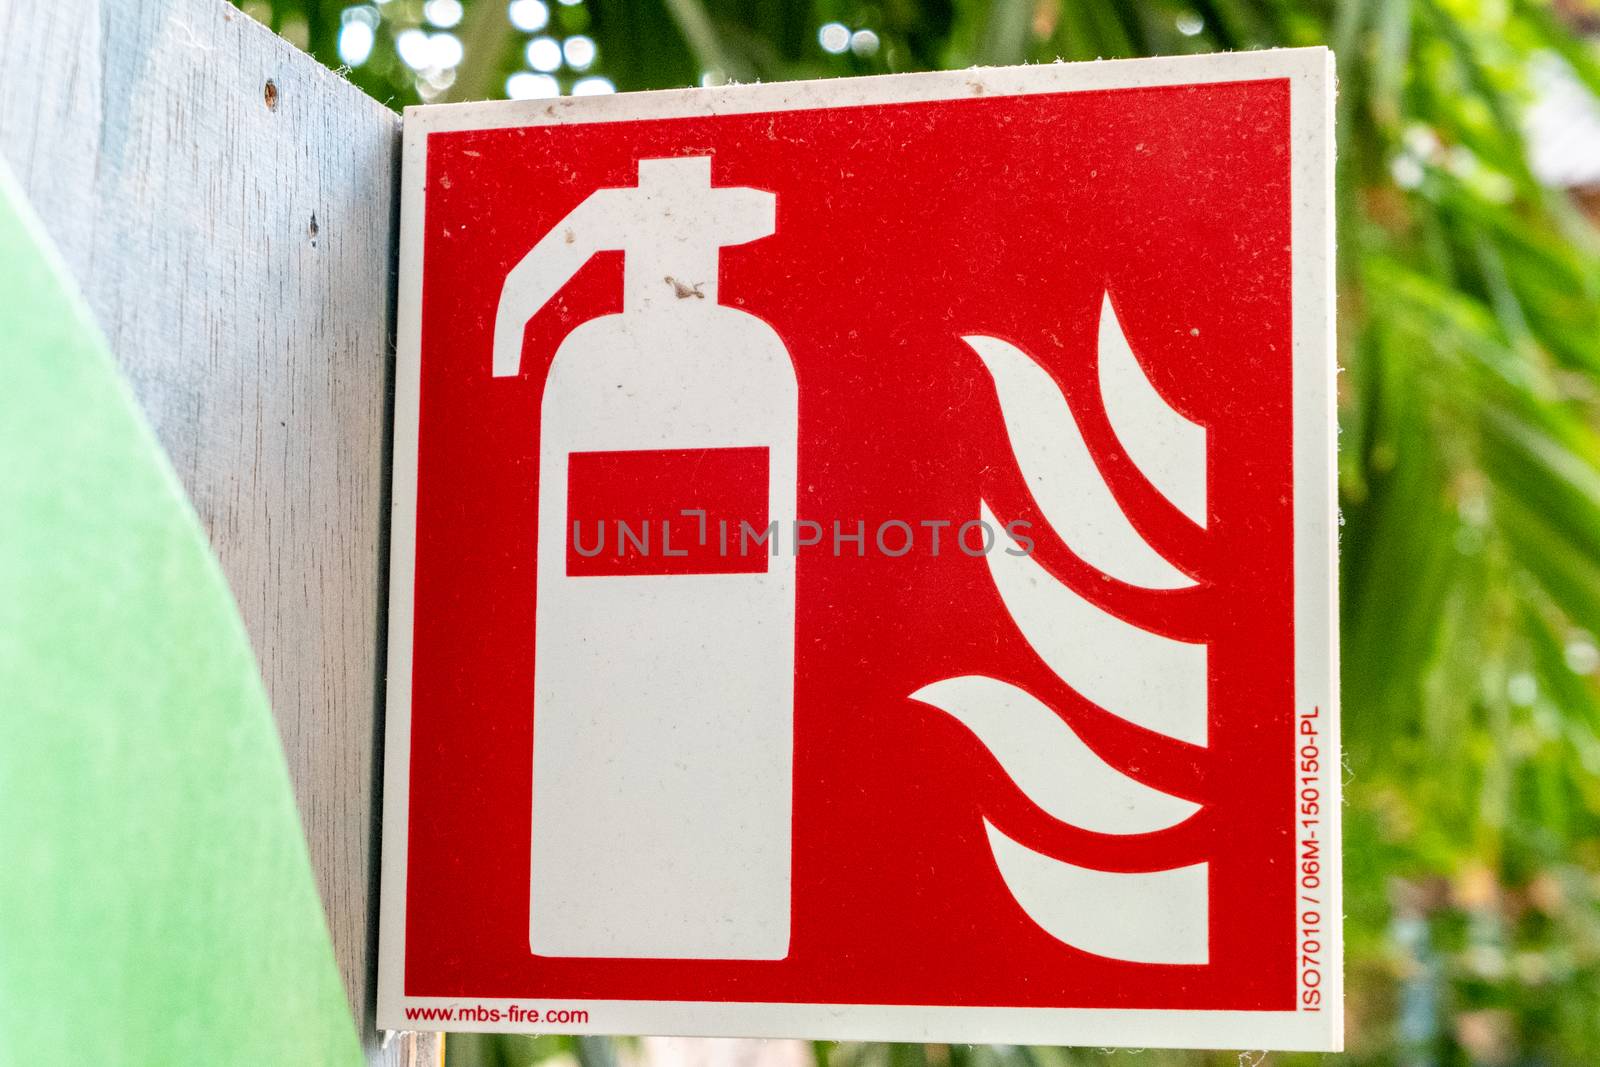 An information sign for a fire extinguisher by Guinness